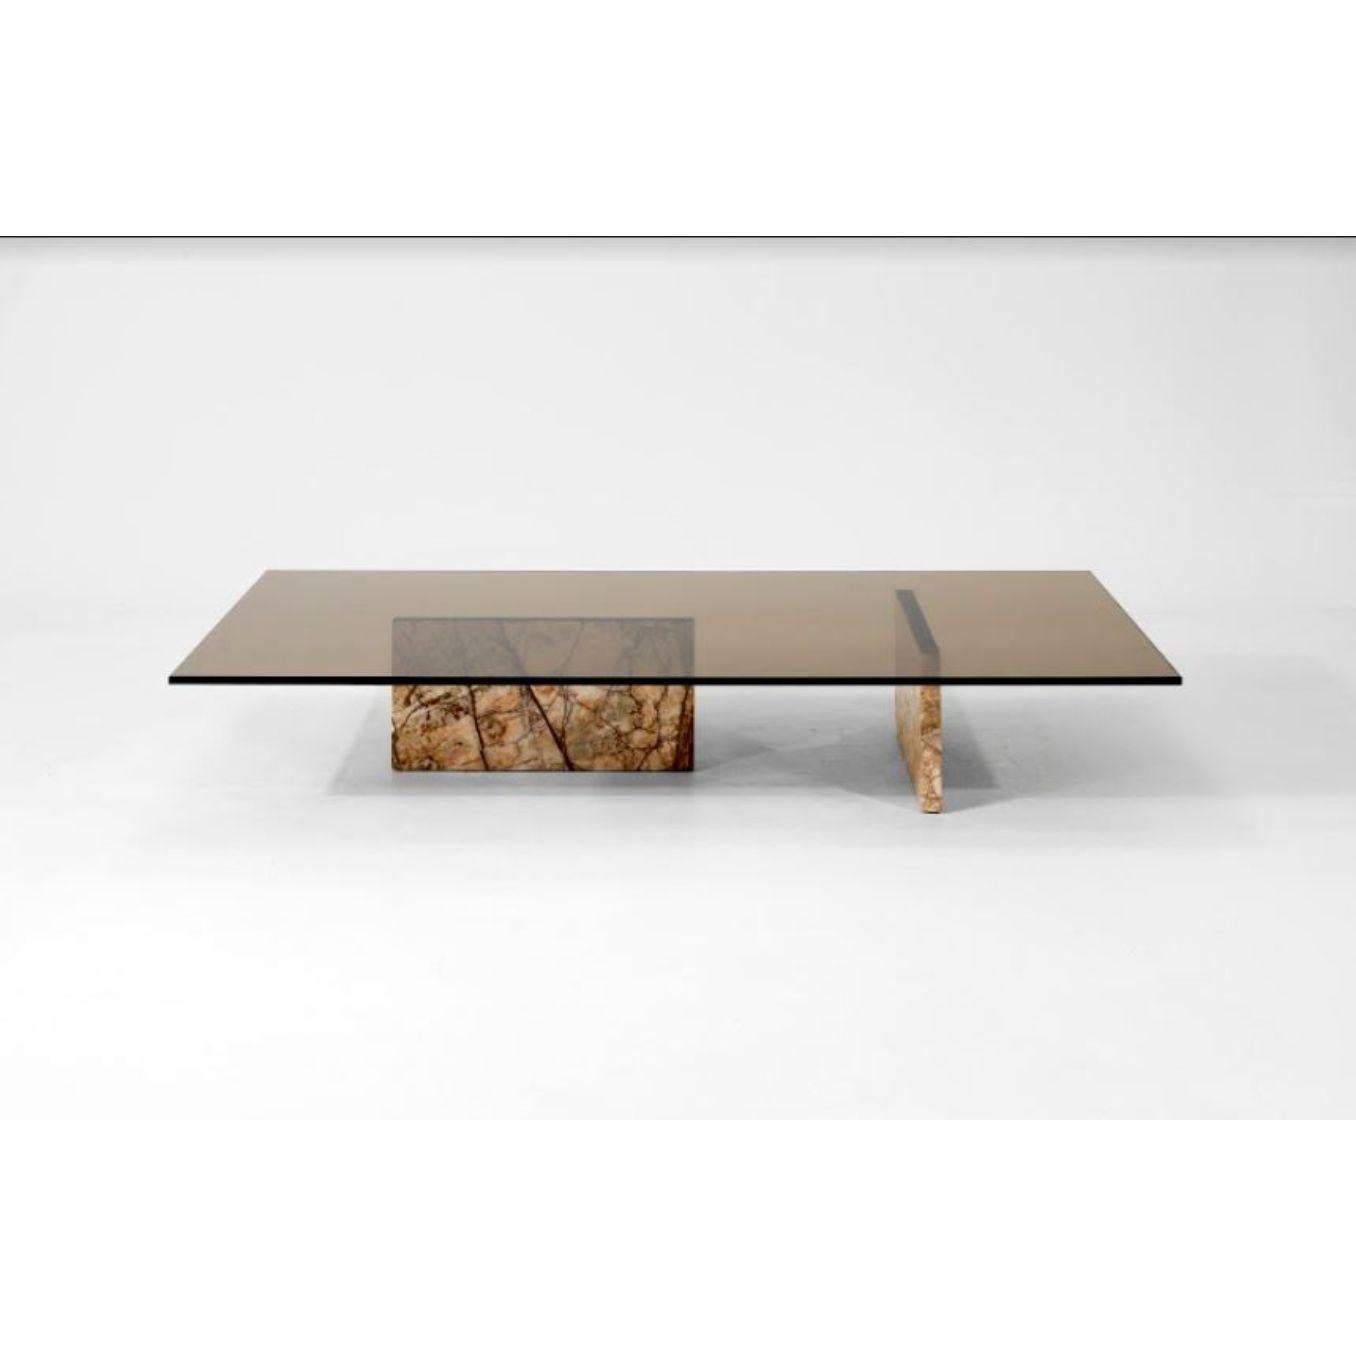 Remerber Me rectangular coffee table by Claste 
Dimensions: D 137.2 x W 76.2 x H 35.5 cm
Material: Carrara Gioia, Belvedere Black, Mont Blanc, Manhatten Calacatta, Fusion Marble, Temptation Marble, Blue Mare 
Weight: 64 kg

Since 2017 Quinlan